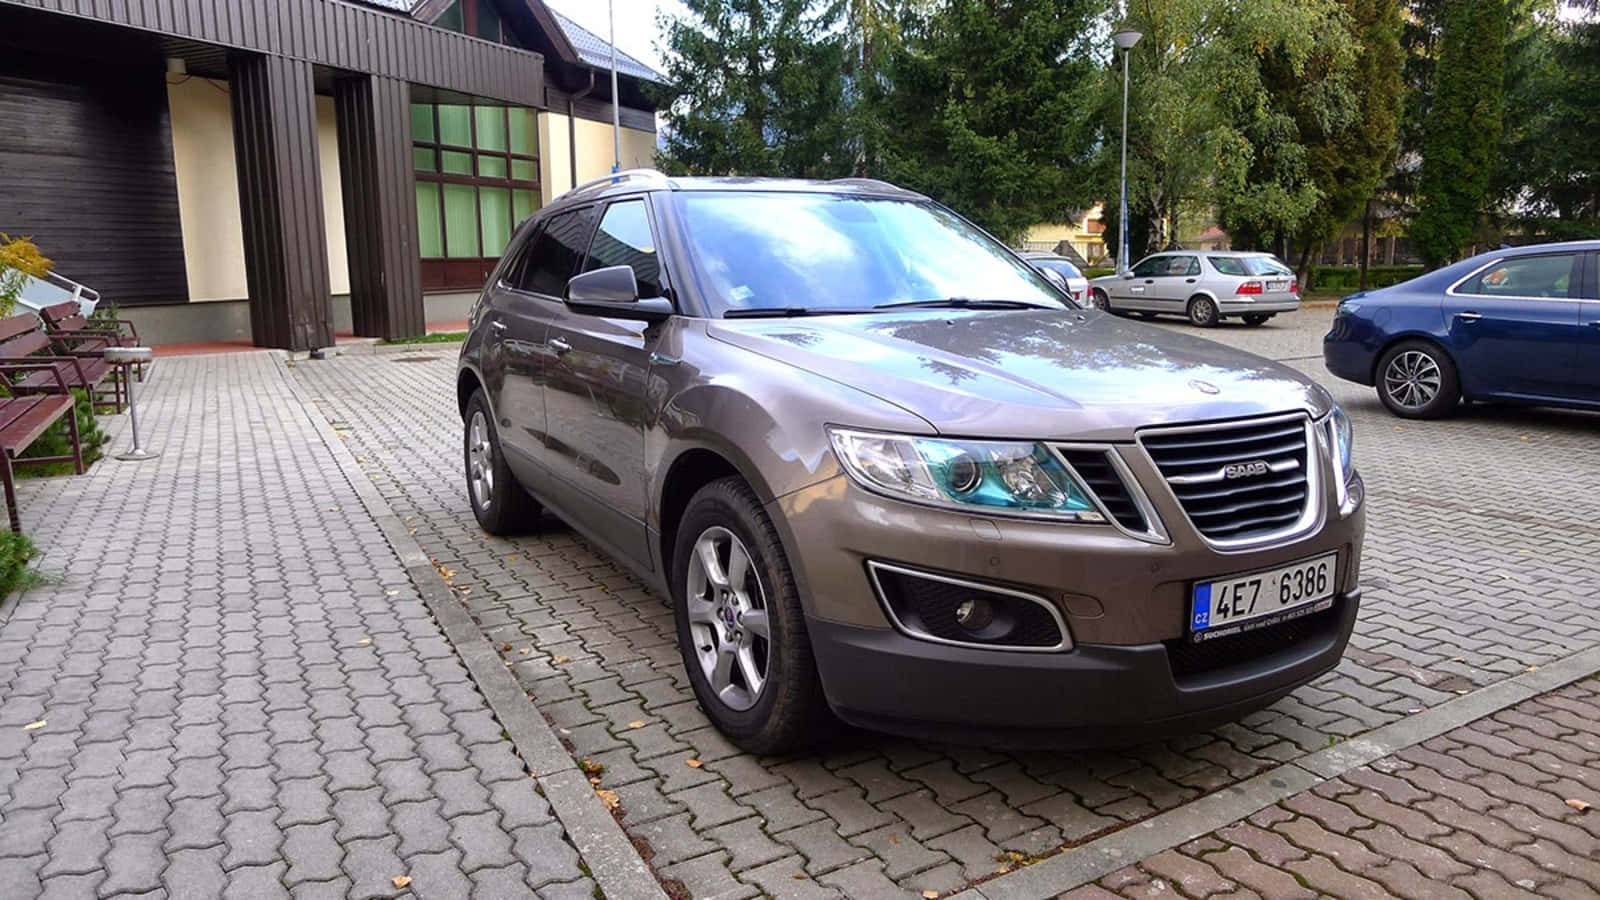 Caption: Graceful And Dynamic Saab 9-4x - The Swedish Luxurious Suv Wallpaper